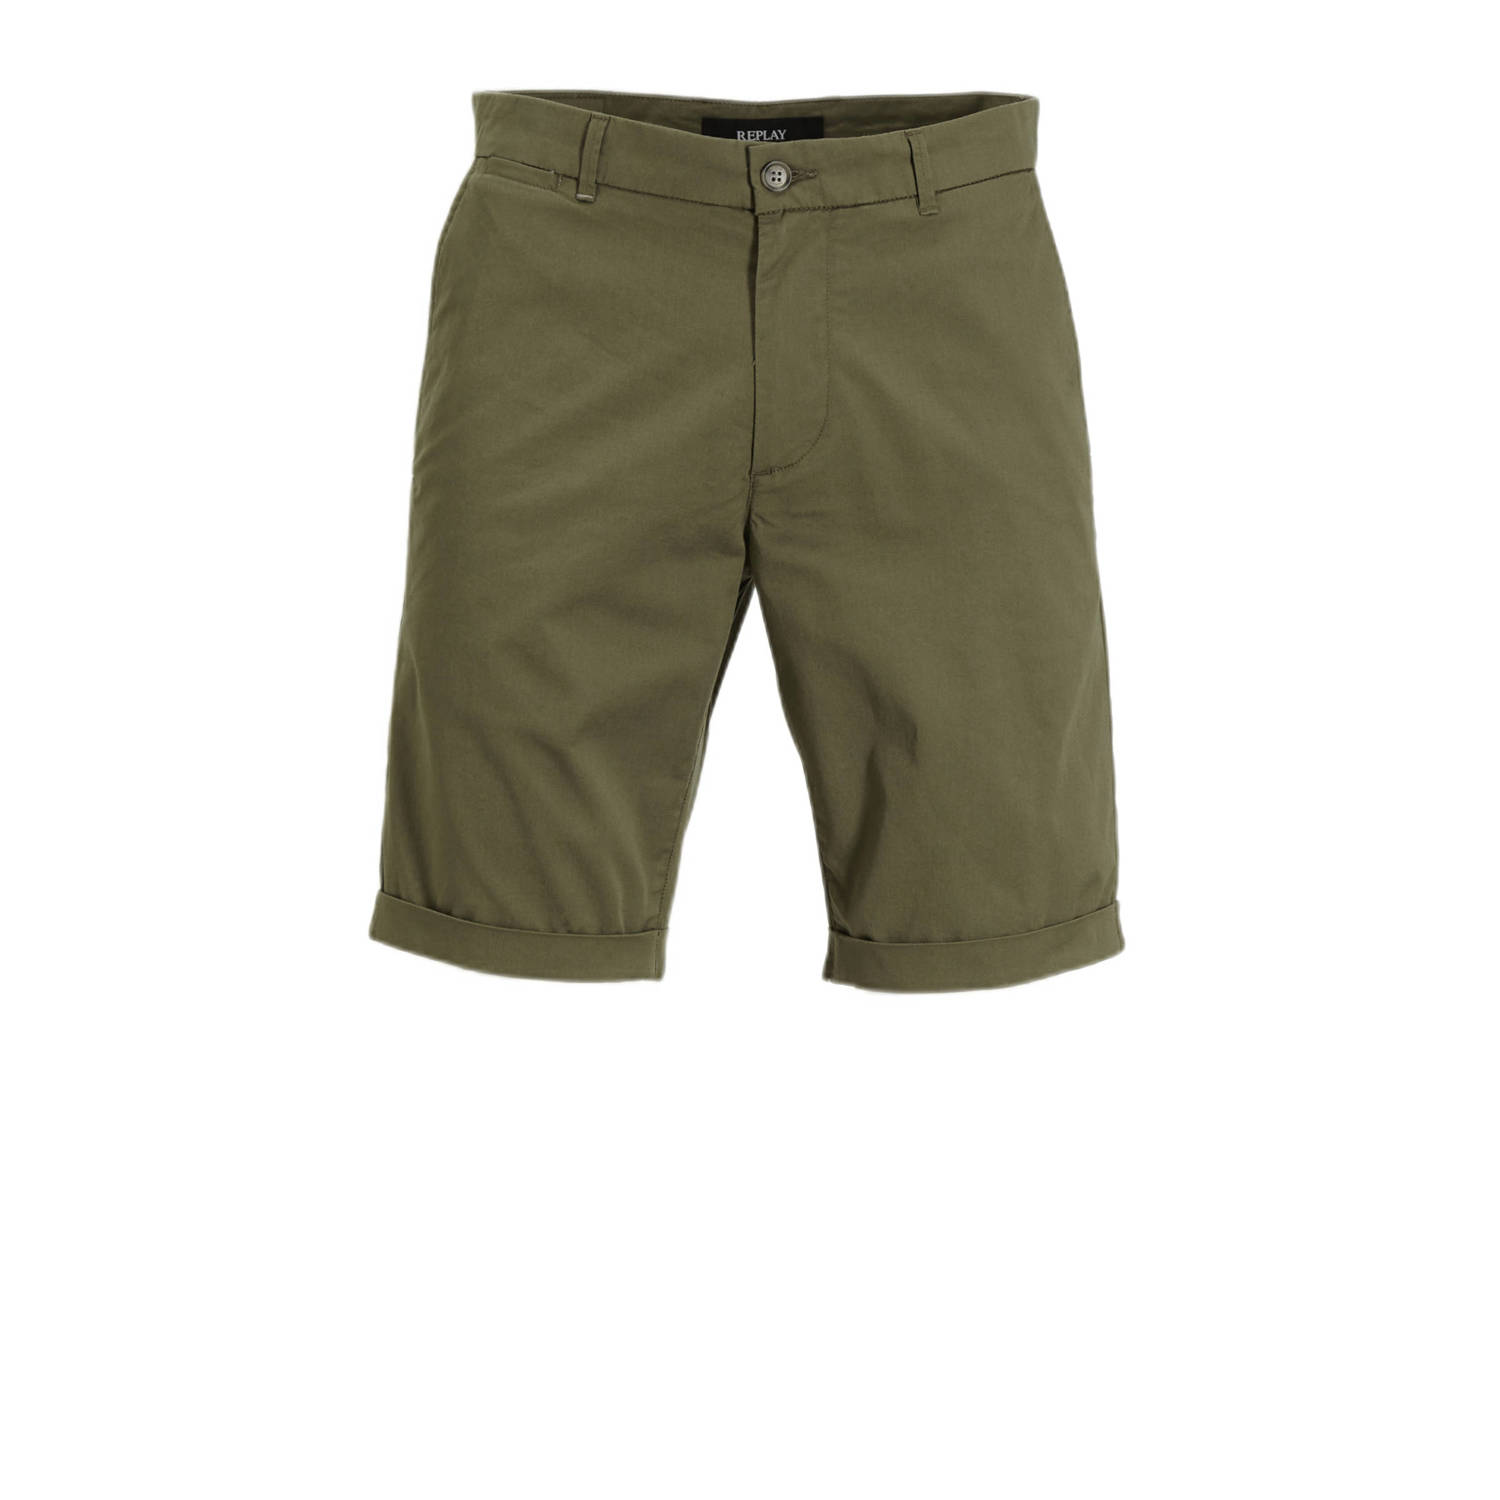 REPLAY slim fit short 851 olive